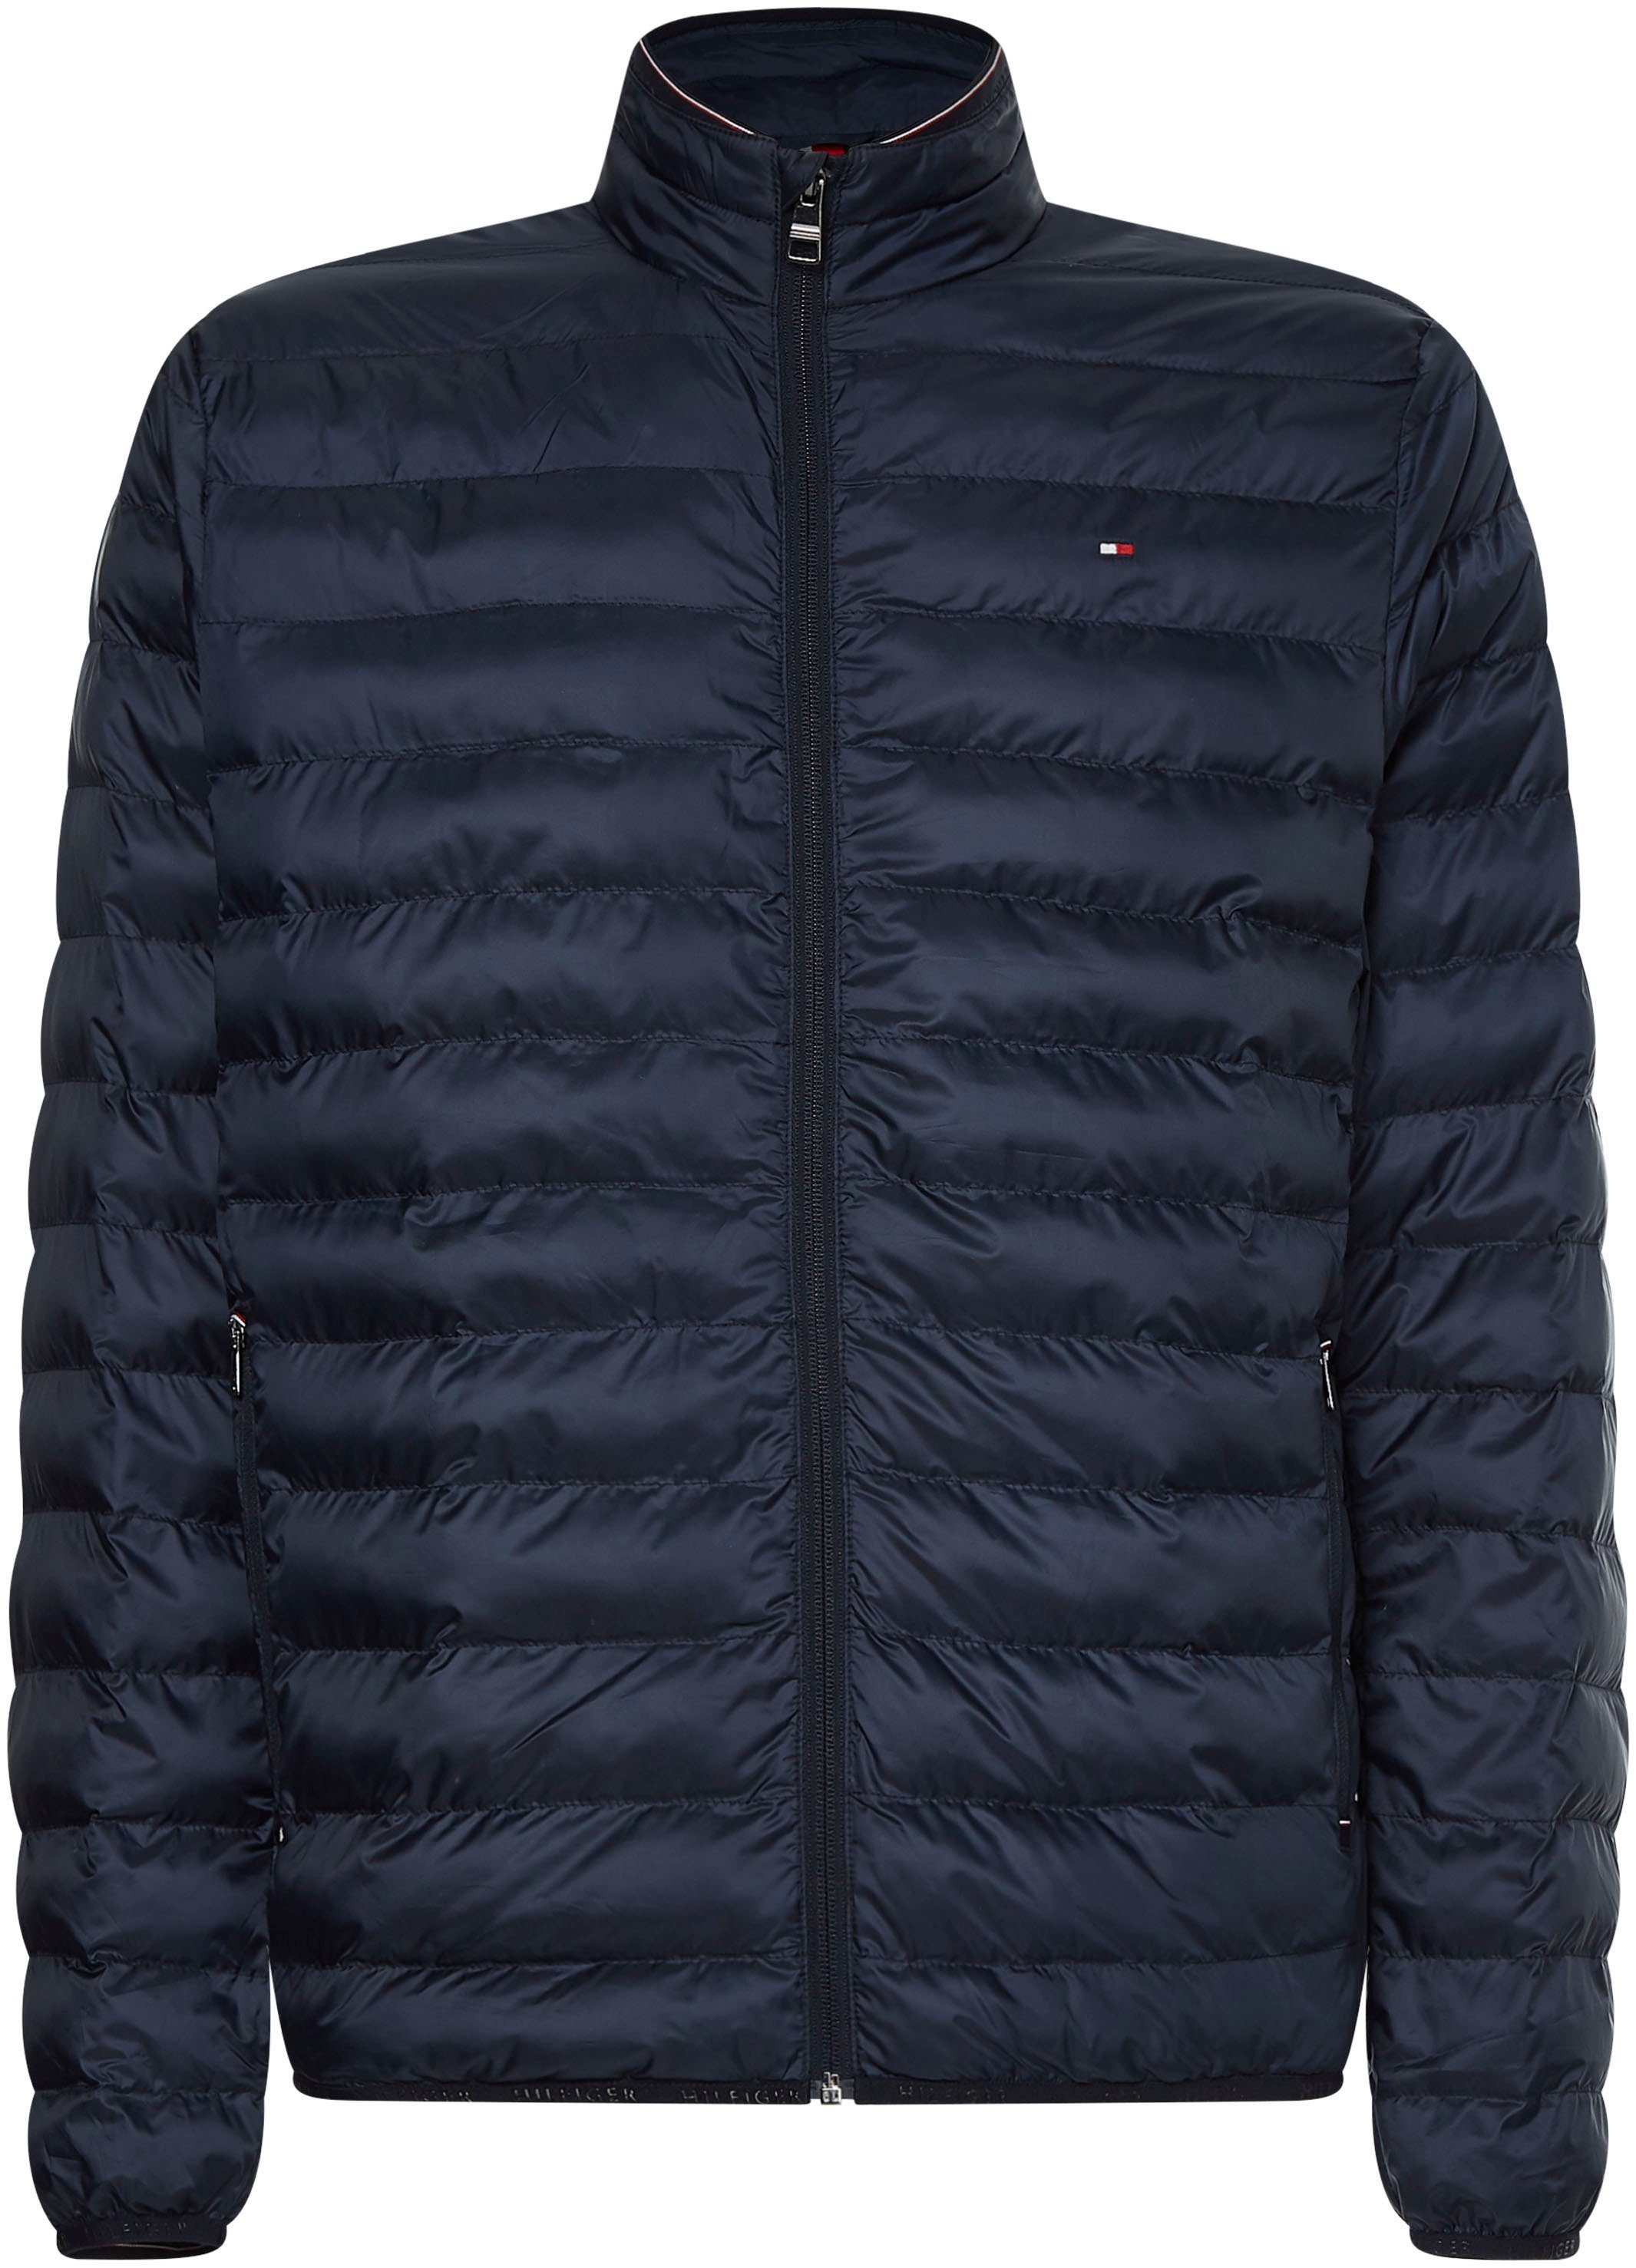 CORE Tommy Hilfiger RECYCLED JACKET sky PACKABLE Steppjacke desert